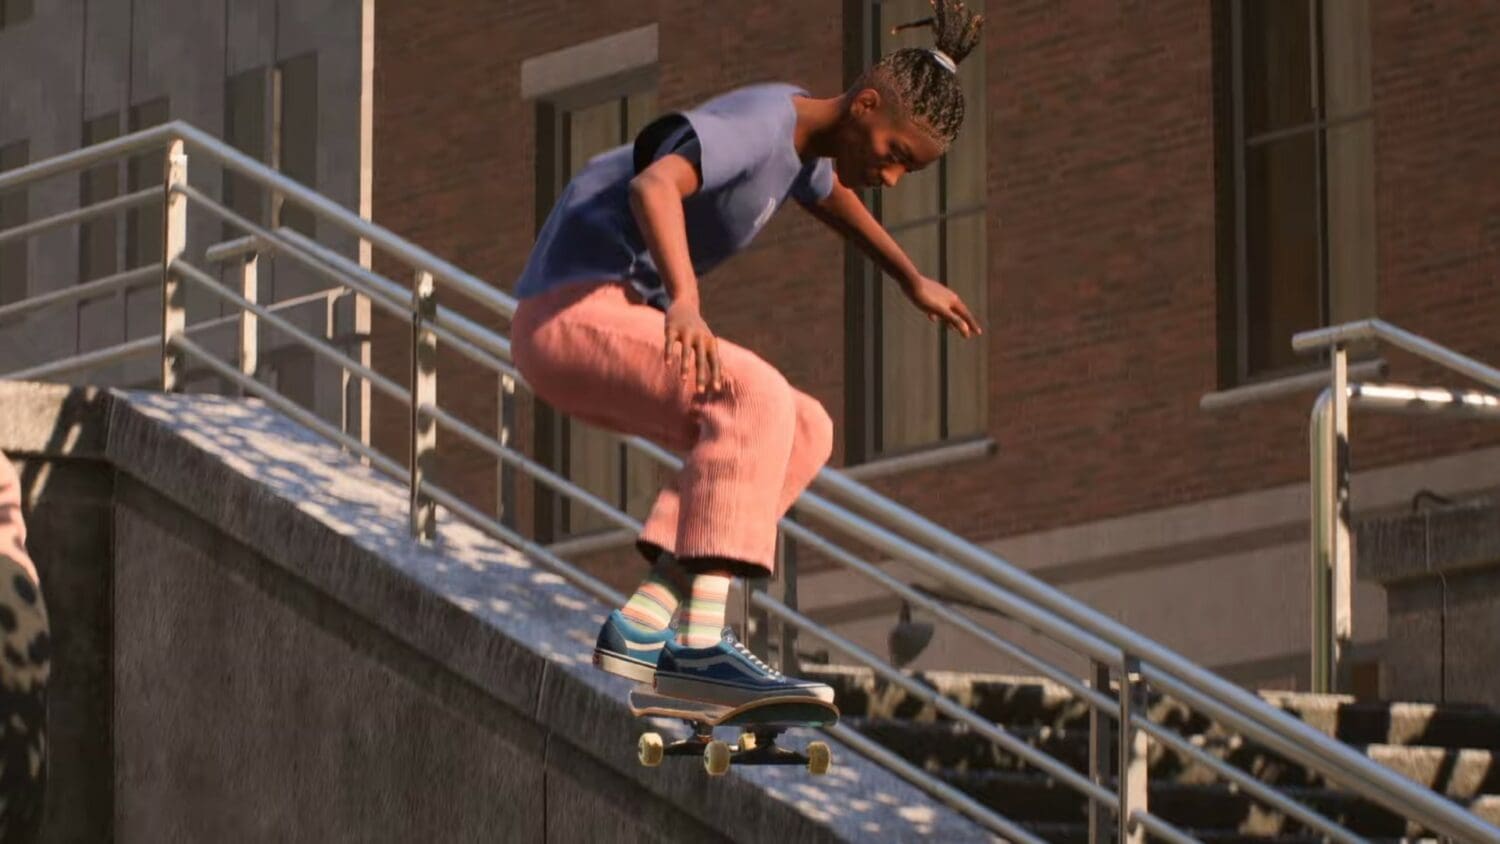 Skate 4 Playtest Gameplay Shows First Footage Of 2023